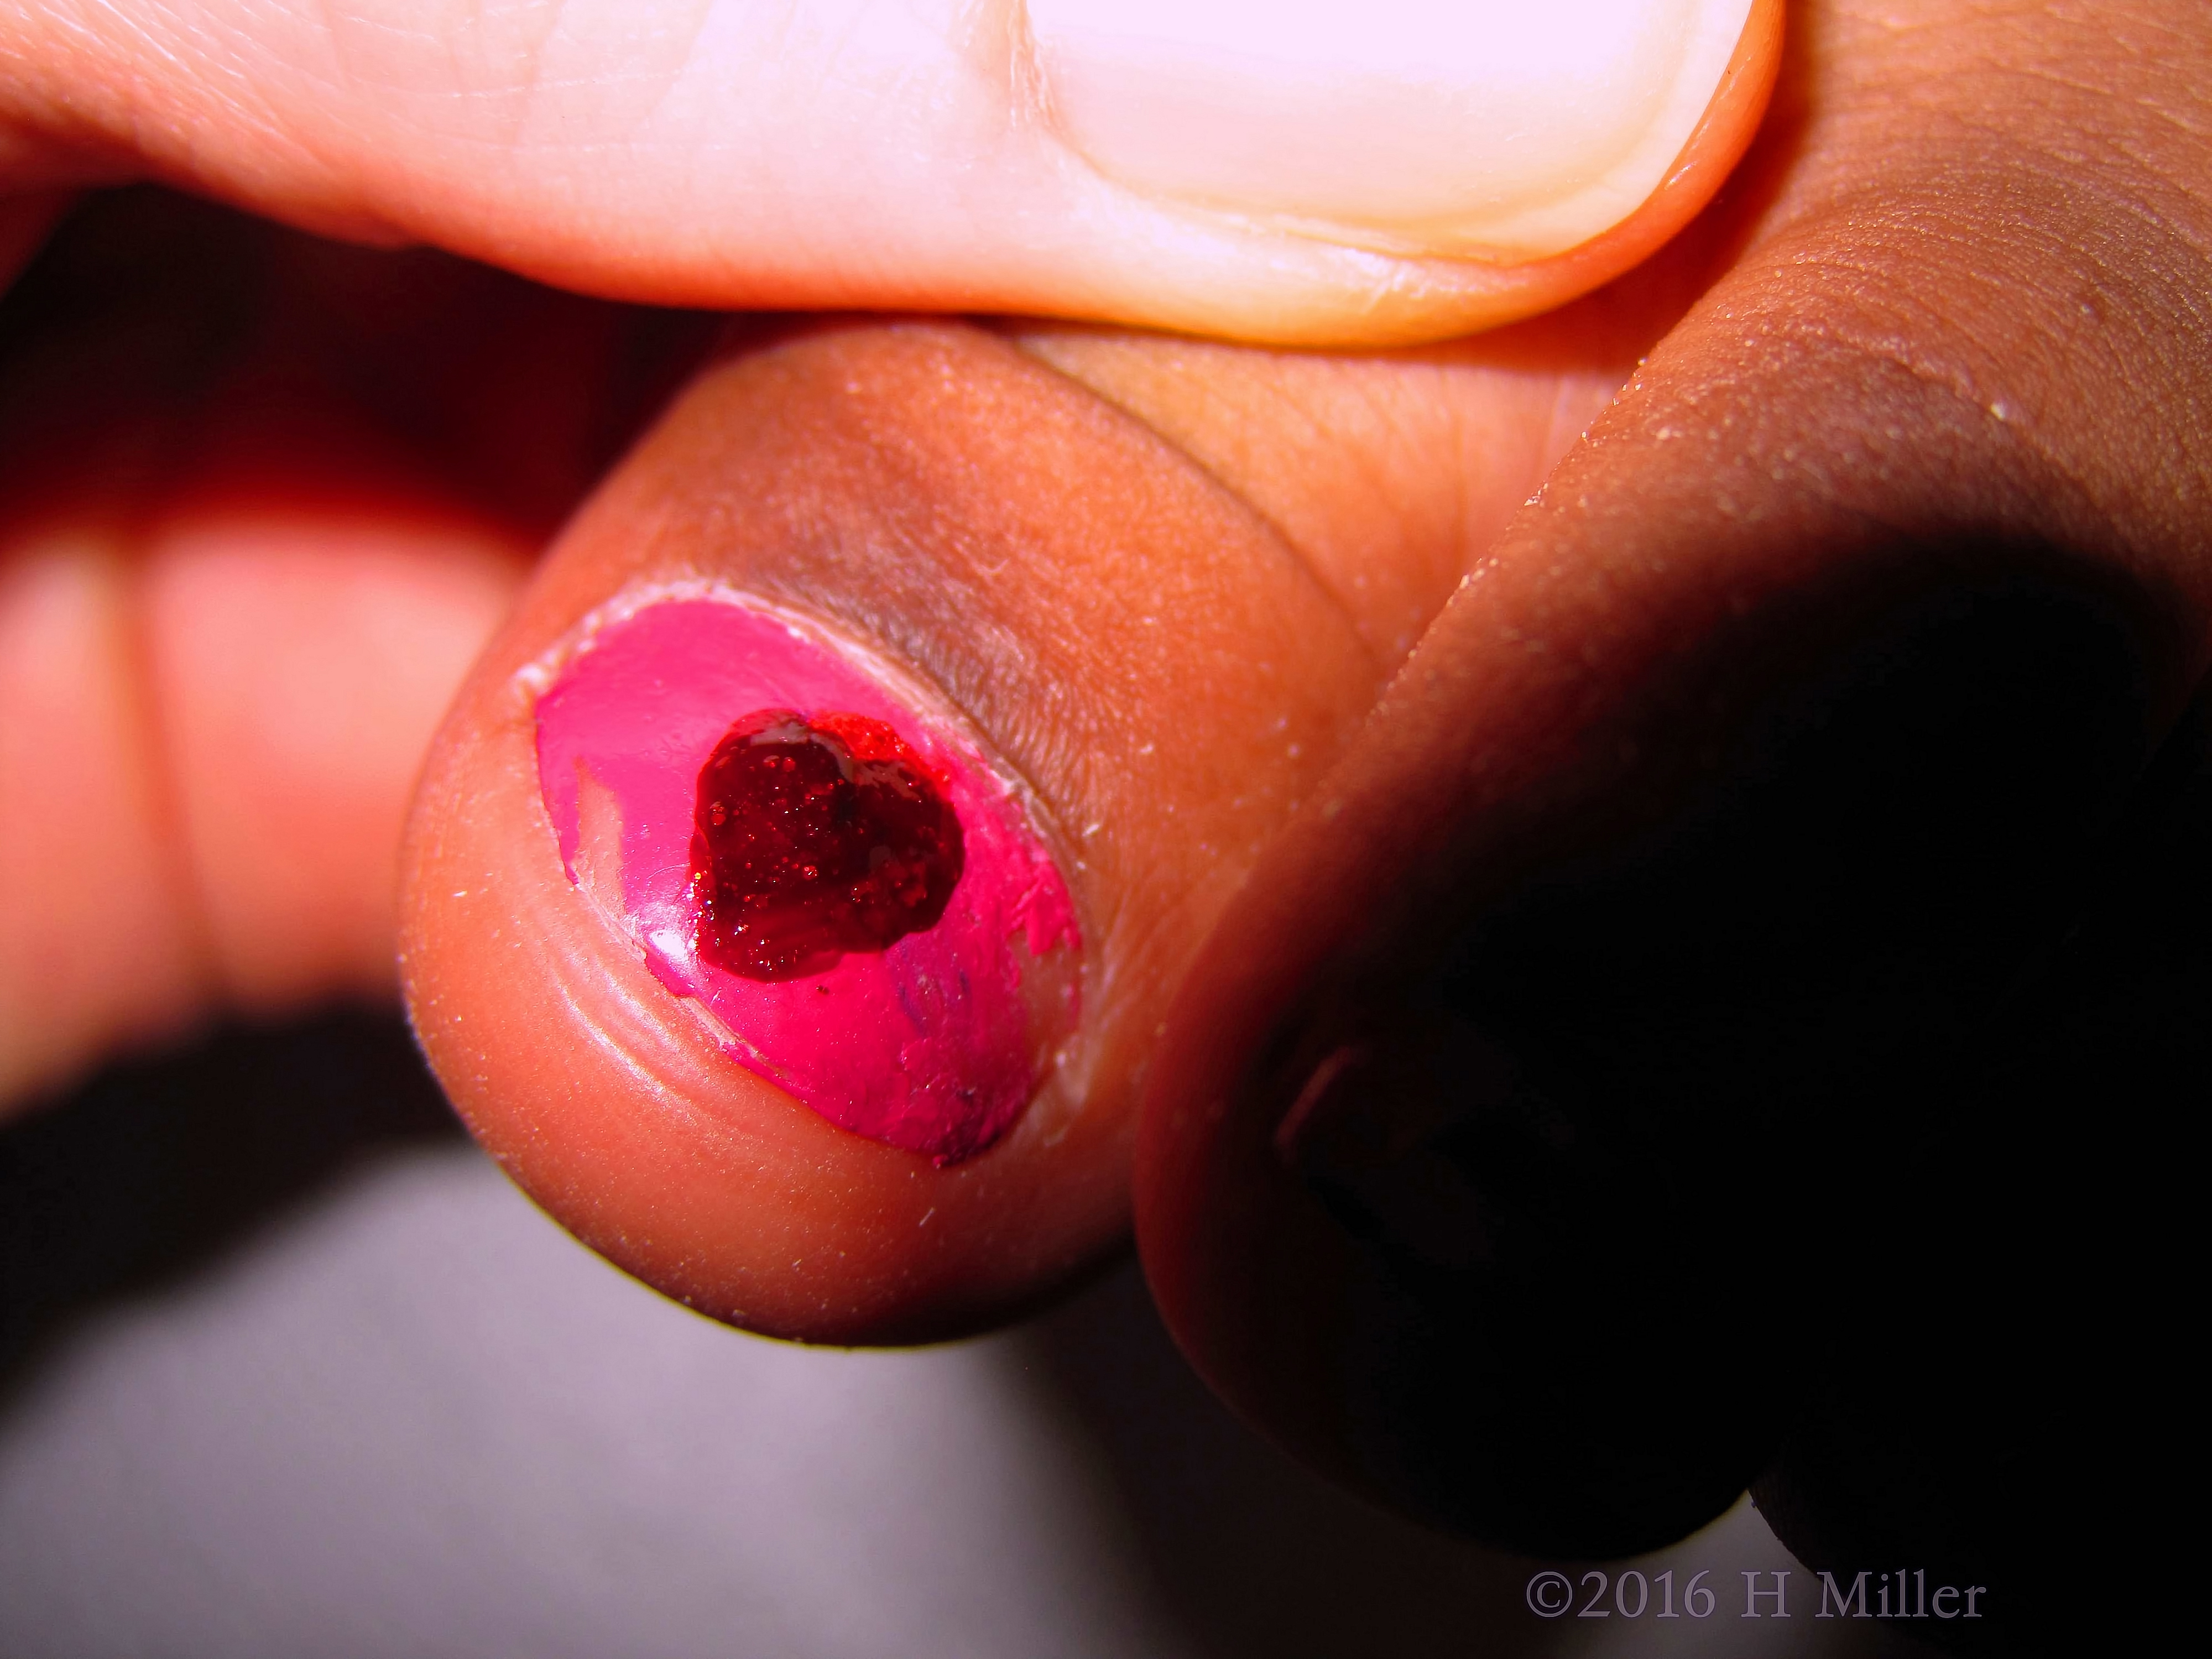 She Has An Adorable Heart On Her Nail!